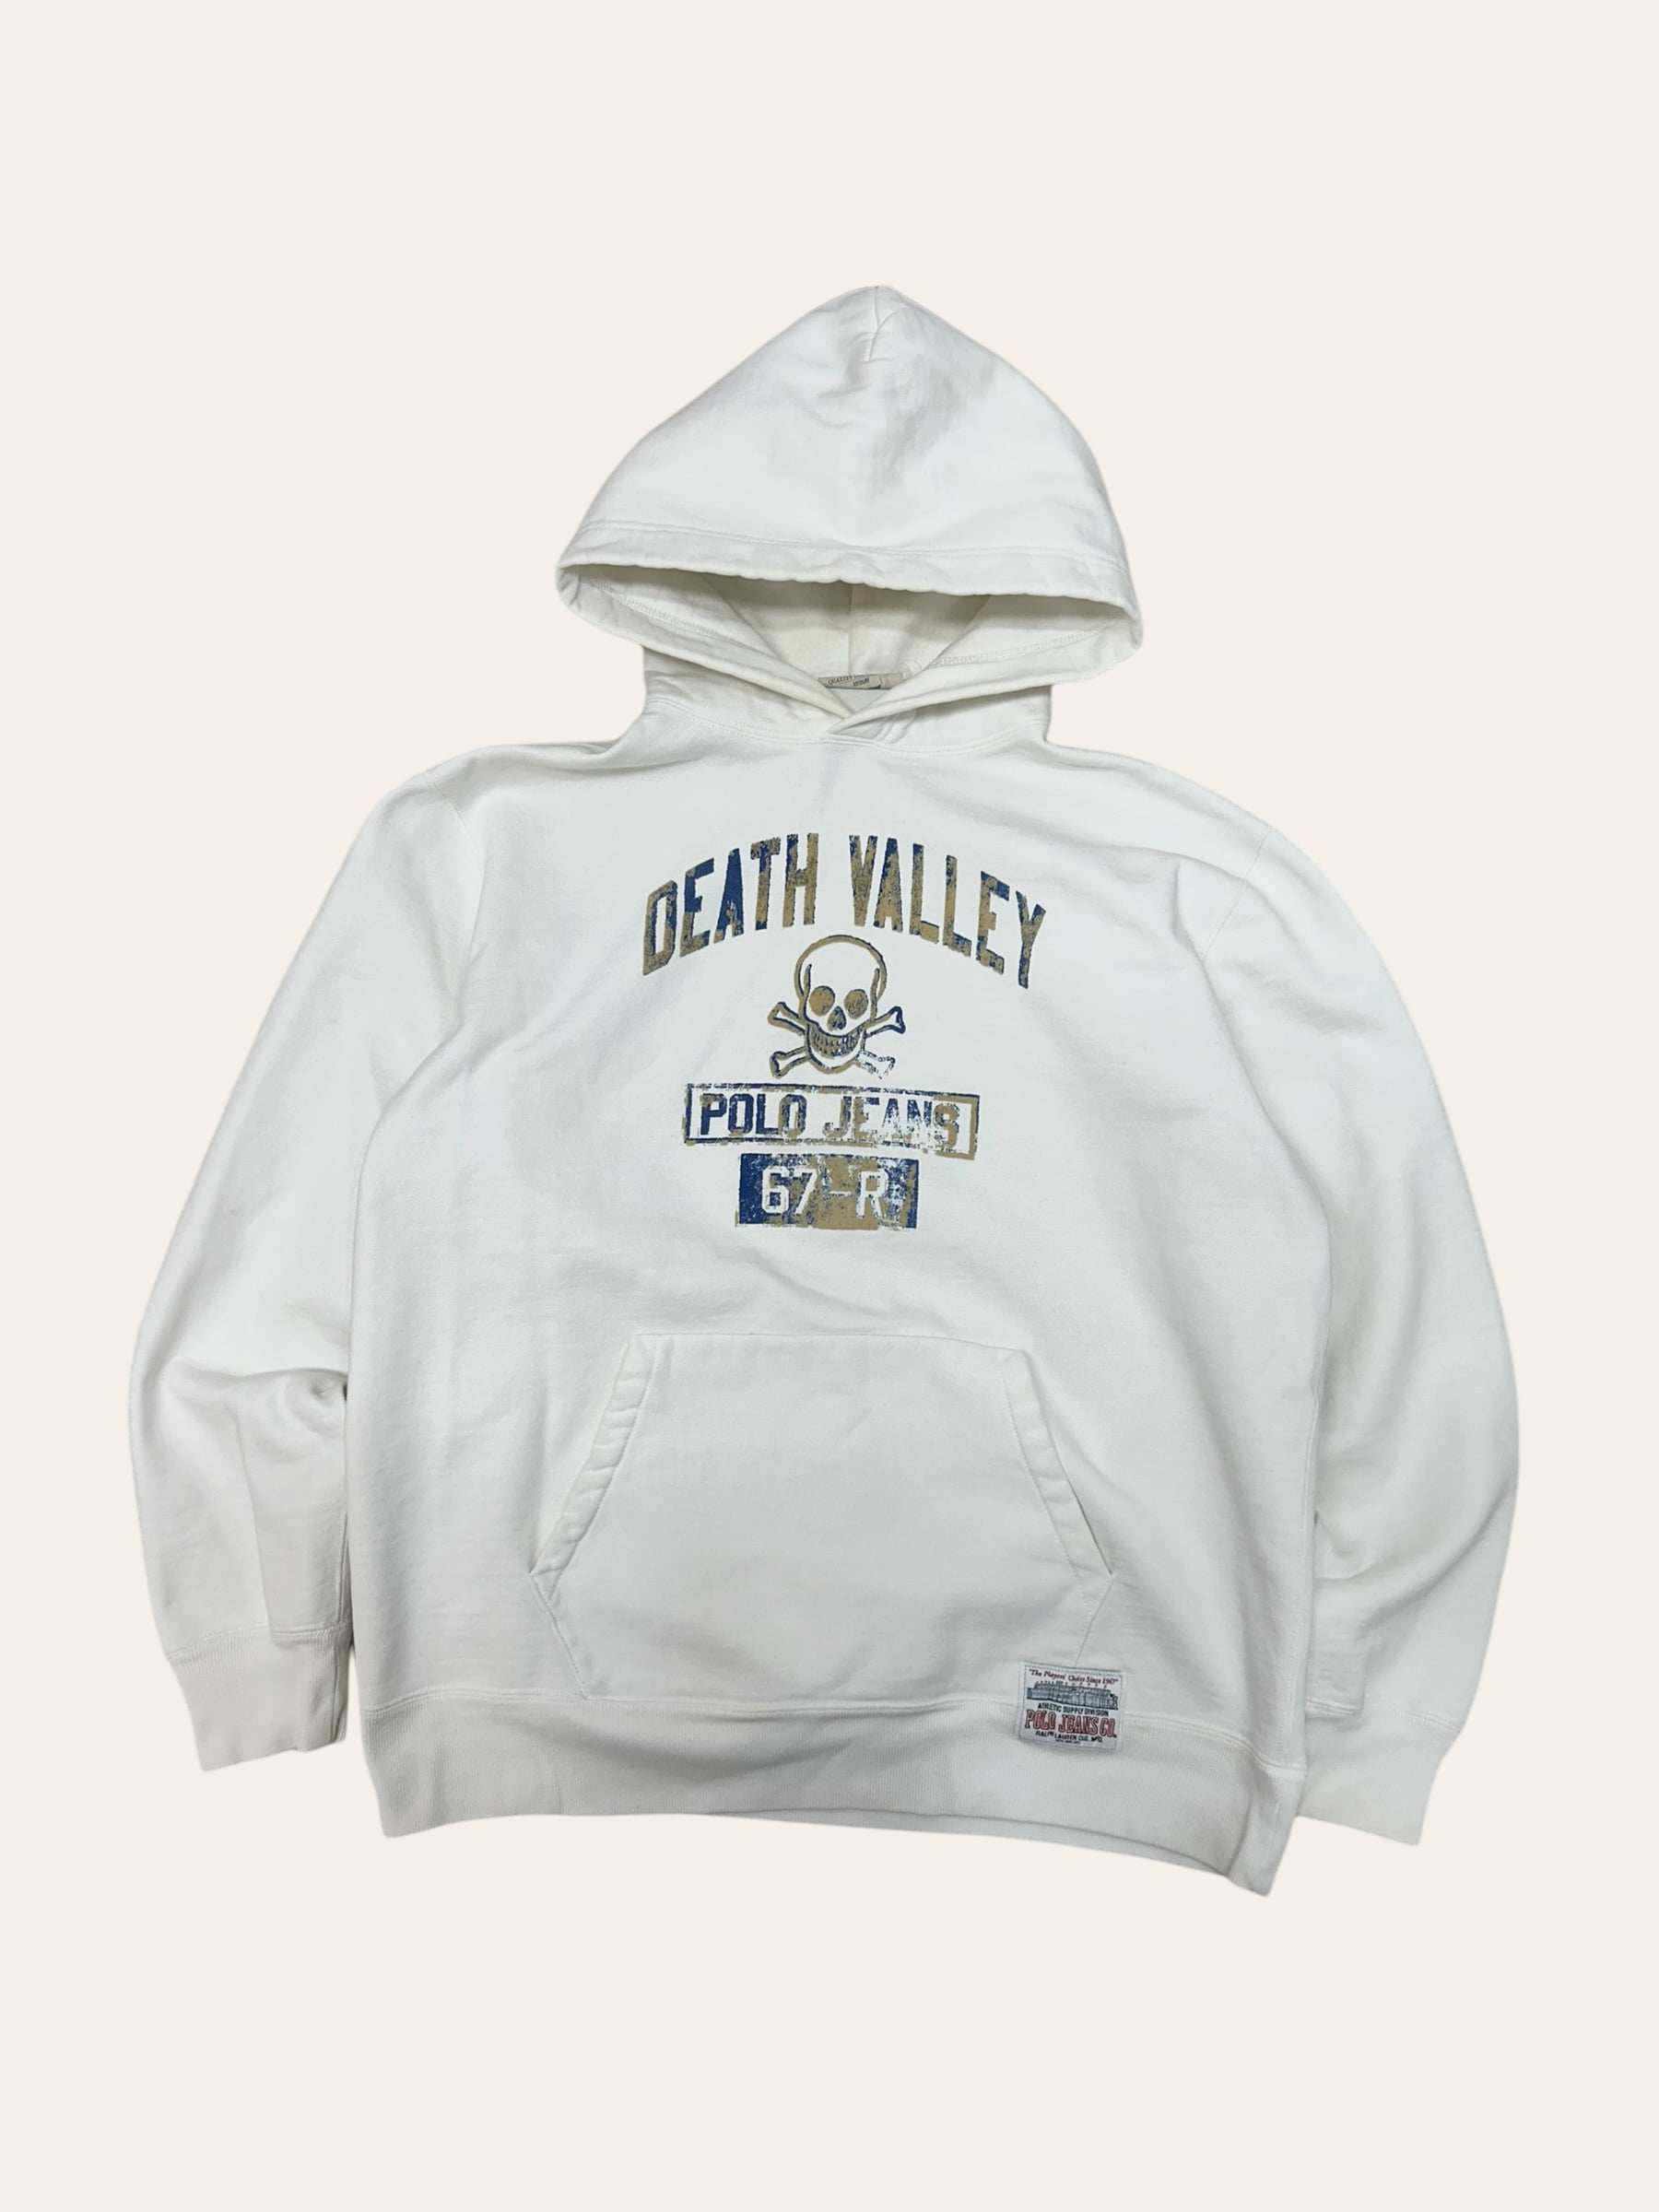 Polo jeans company white death valley hoody M